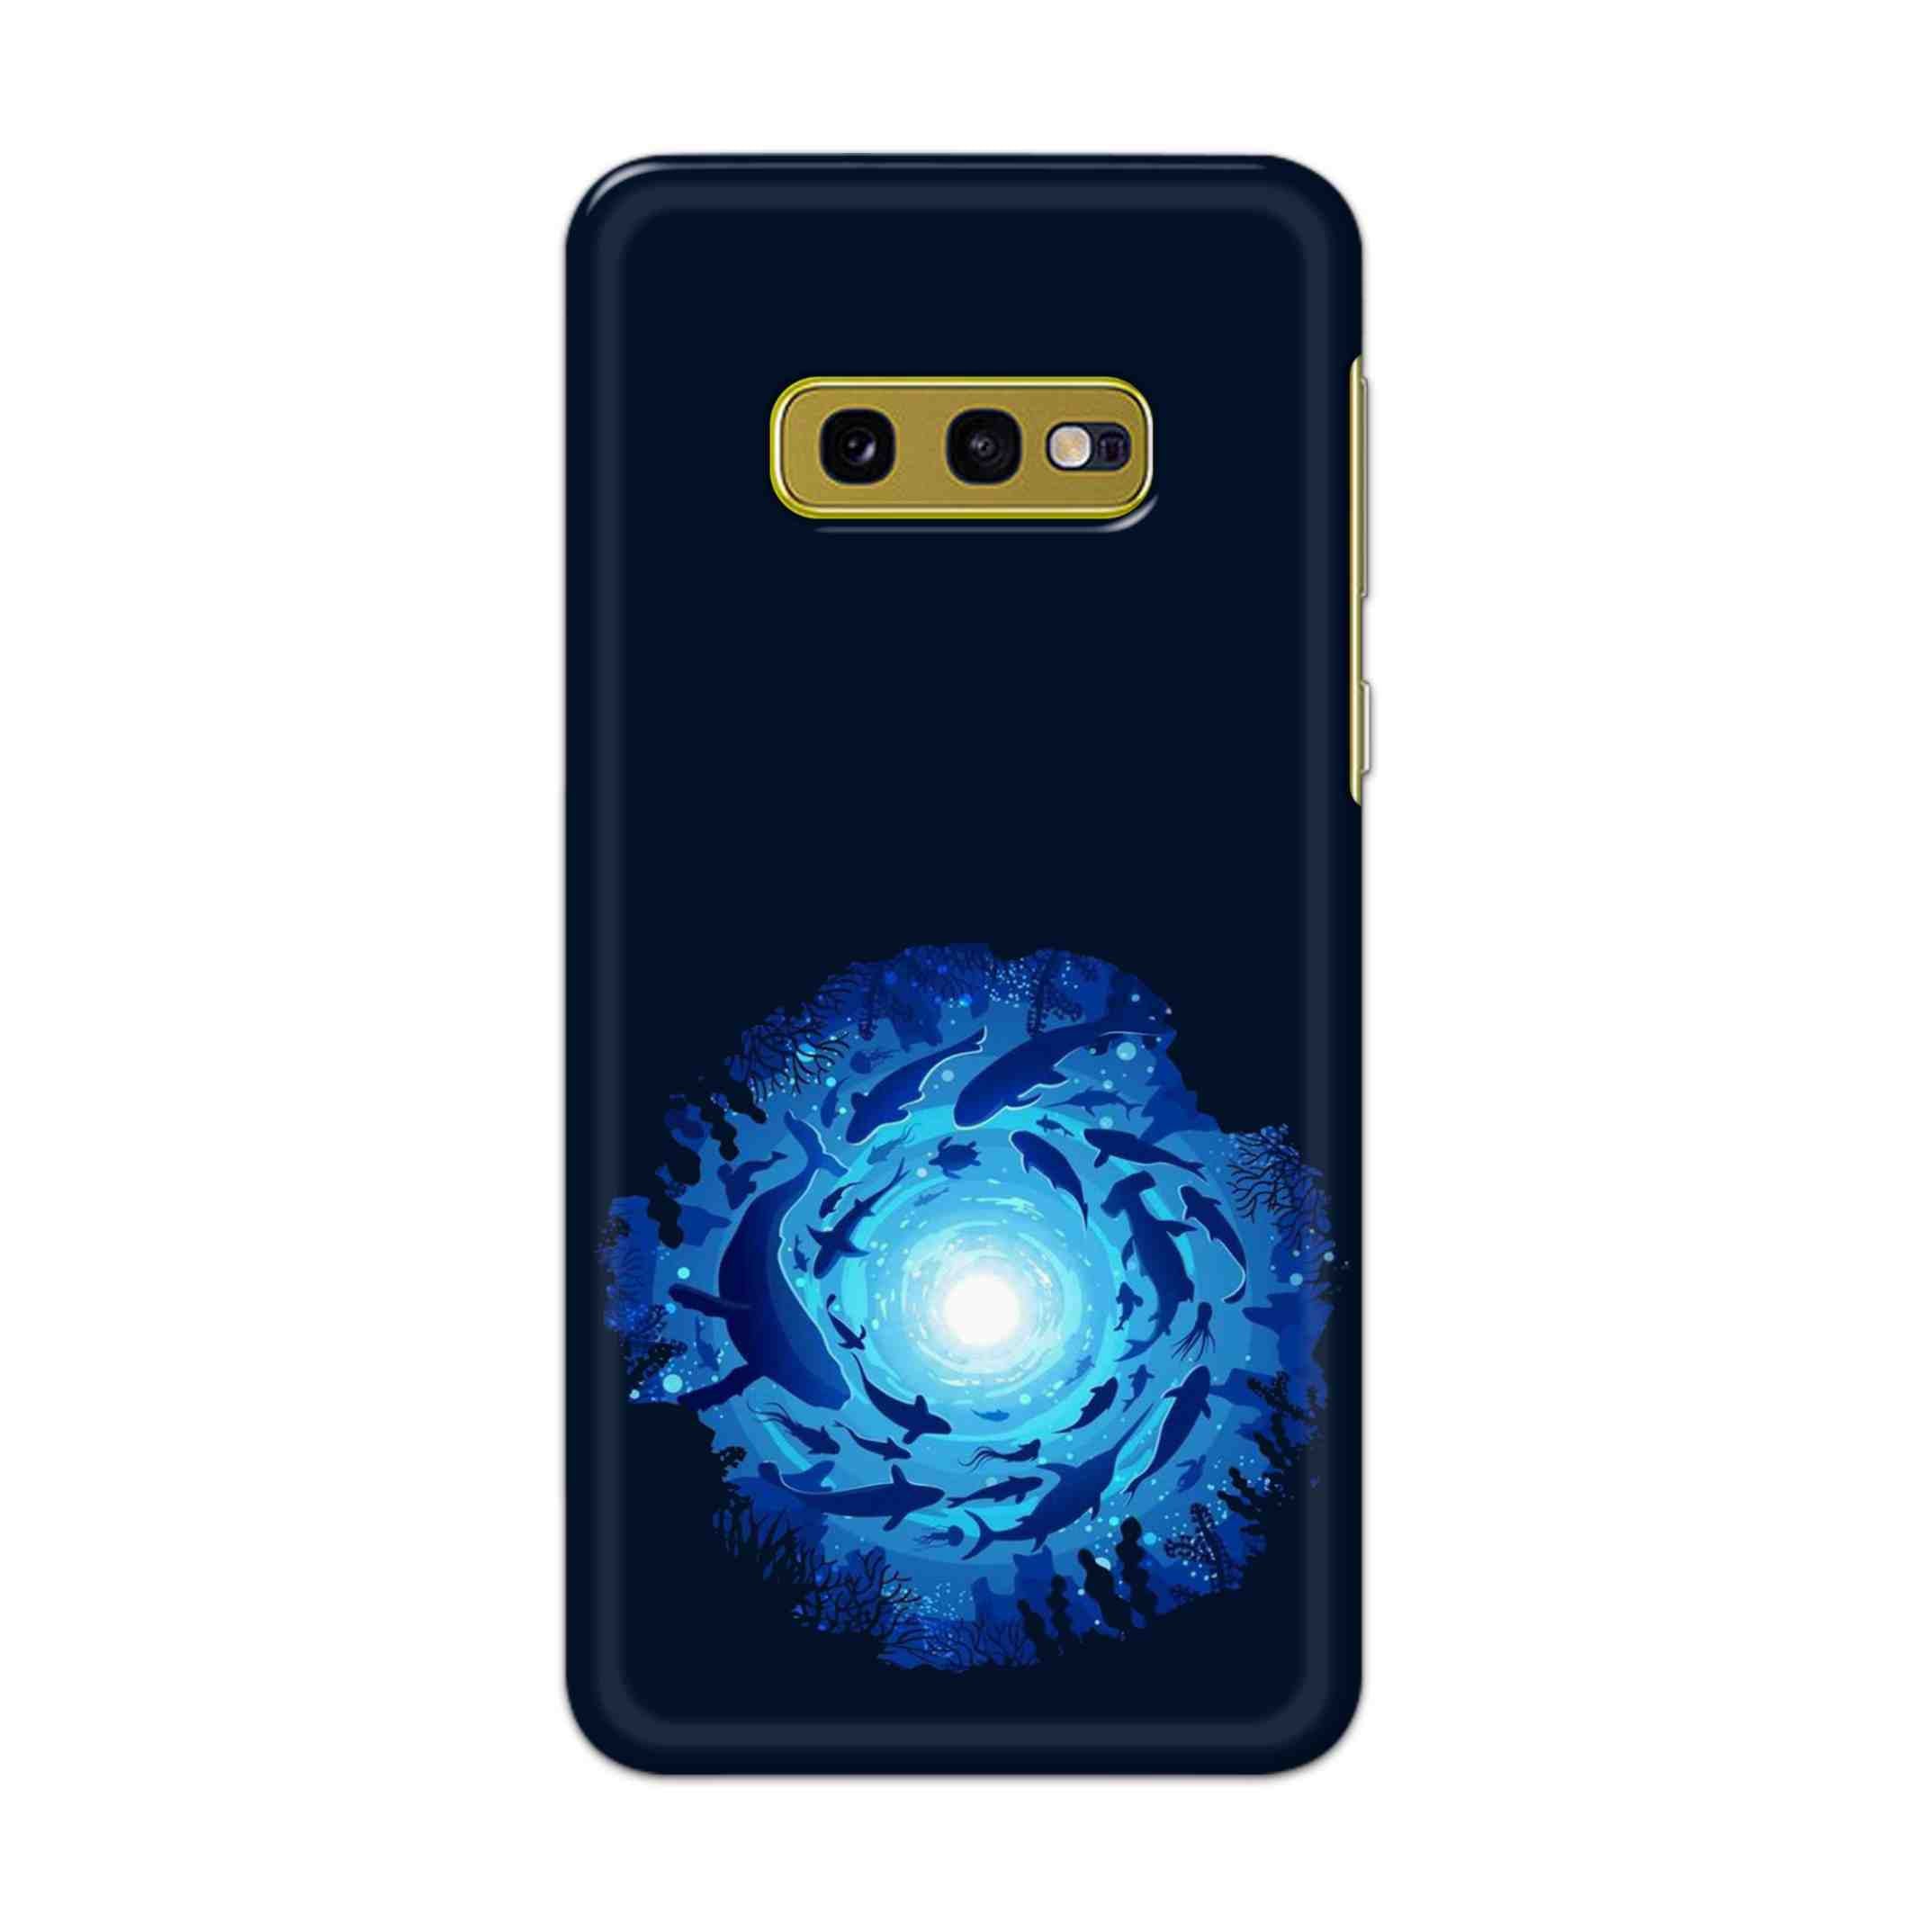 Buy Blue Whale Hard Back Mobile Phone Case Cover For Samsung Galaxy S10e Online